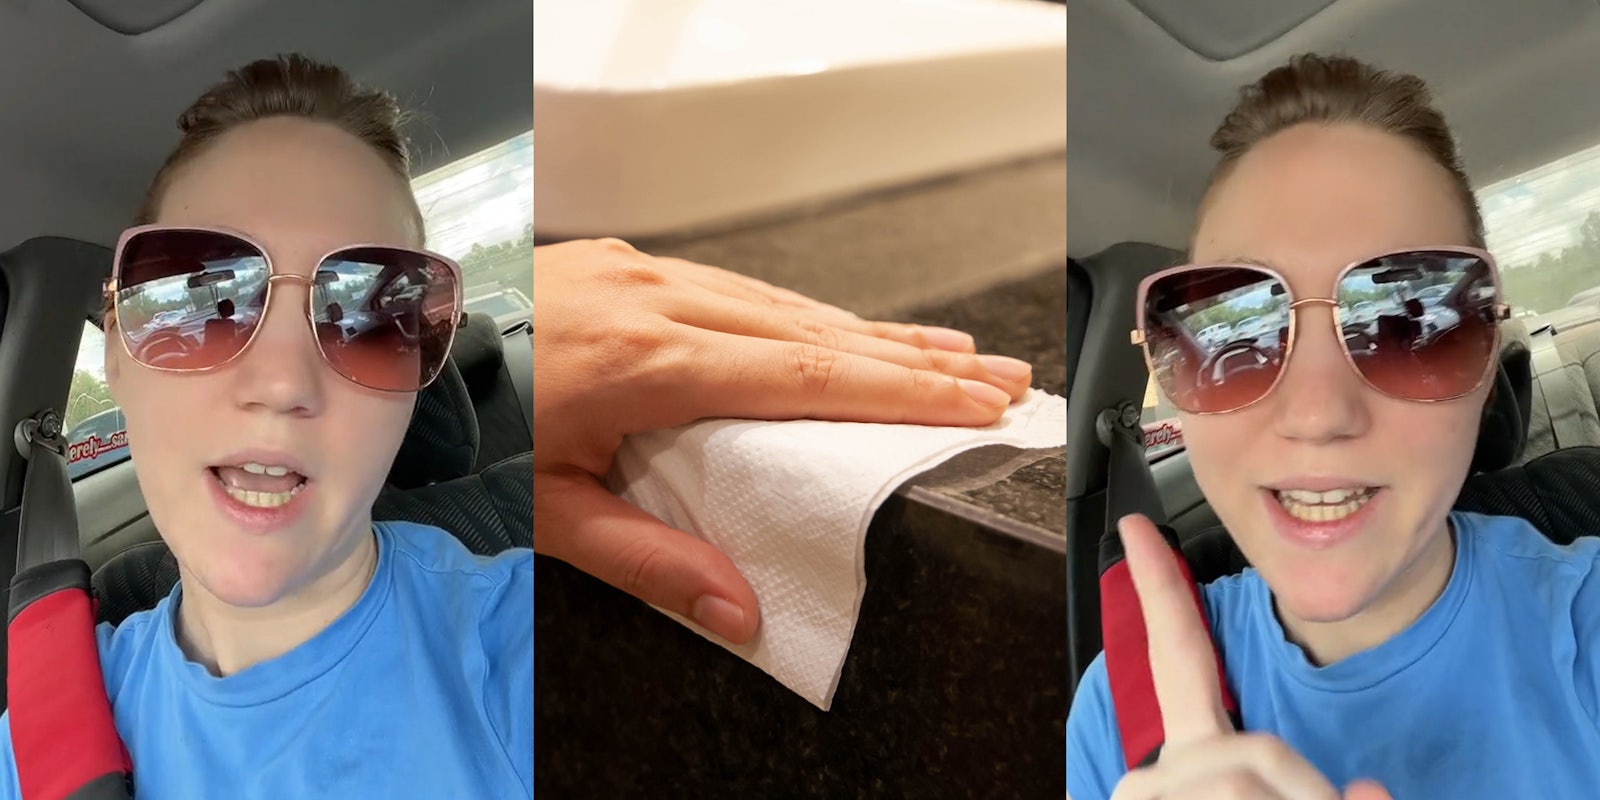 topless maid speaking in car (l) hand wiping counter with paper towel (c) topless maid speaking in car (r)